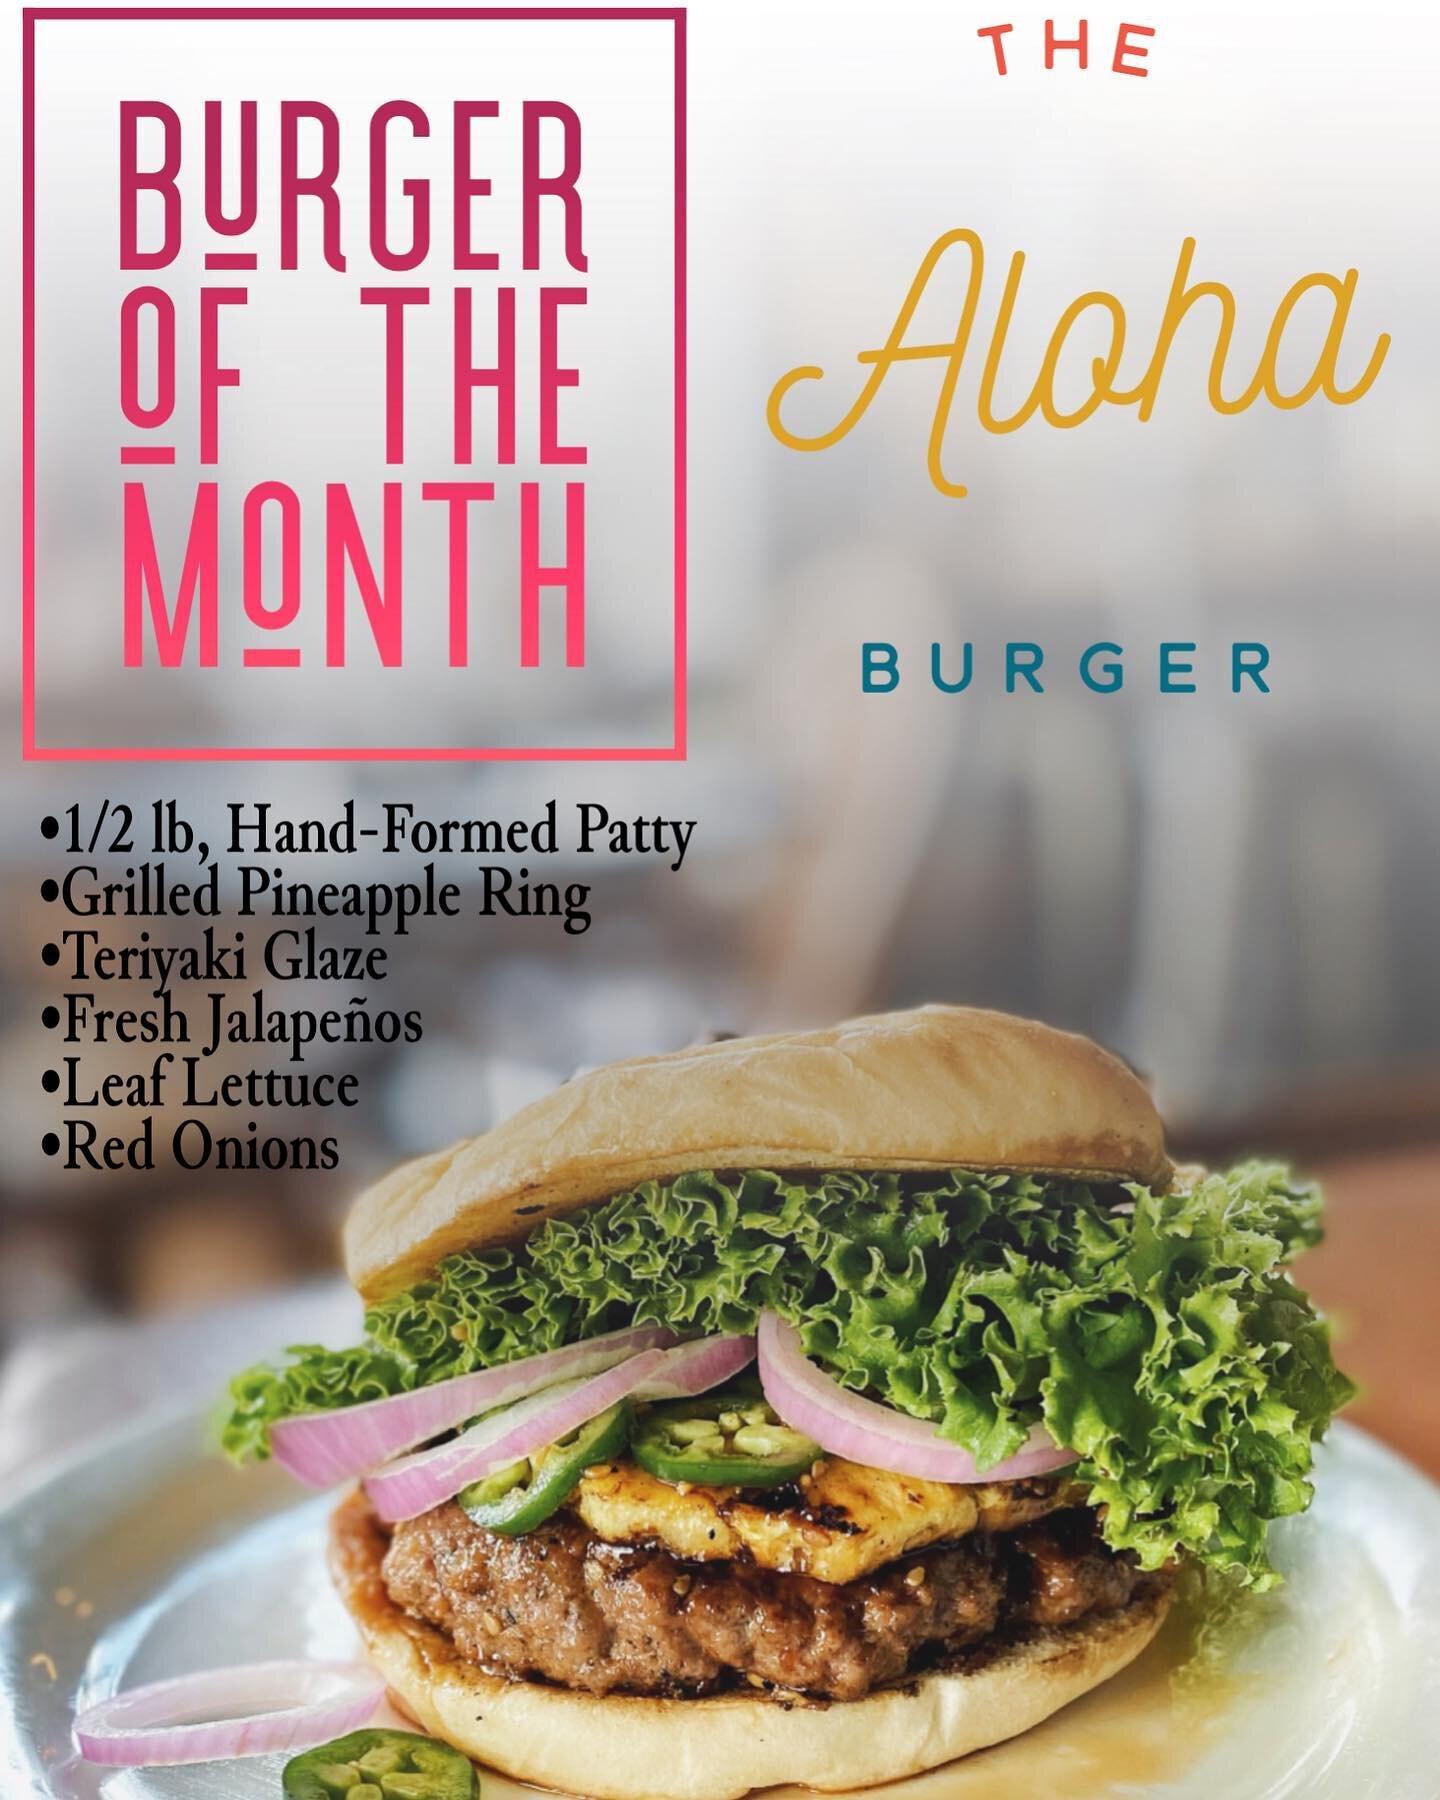 🚨New Burger of the Month 🚨
Take a summer vacation with our new Aloha Burger!
🌺🍍🌶🍔🌺🍍🌶🍔🌺🍍🌶🍔🌺🍍🌶🍔🌺
Sweet, spicy, and incredibly fresh, this pineapple-teriyaki burger is just what you&rsquo;re looking for in this heat 🌺